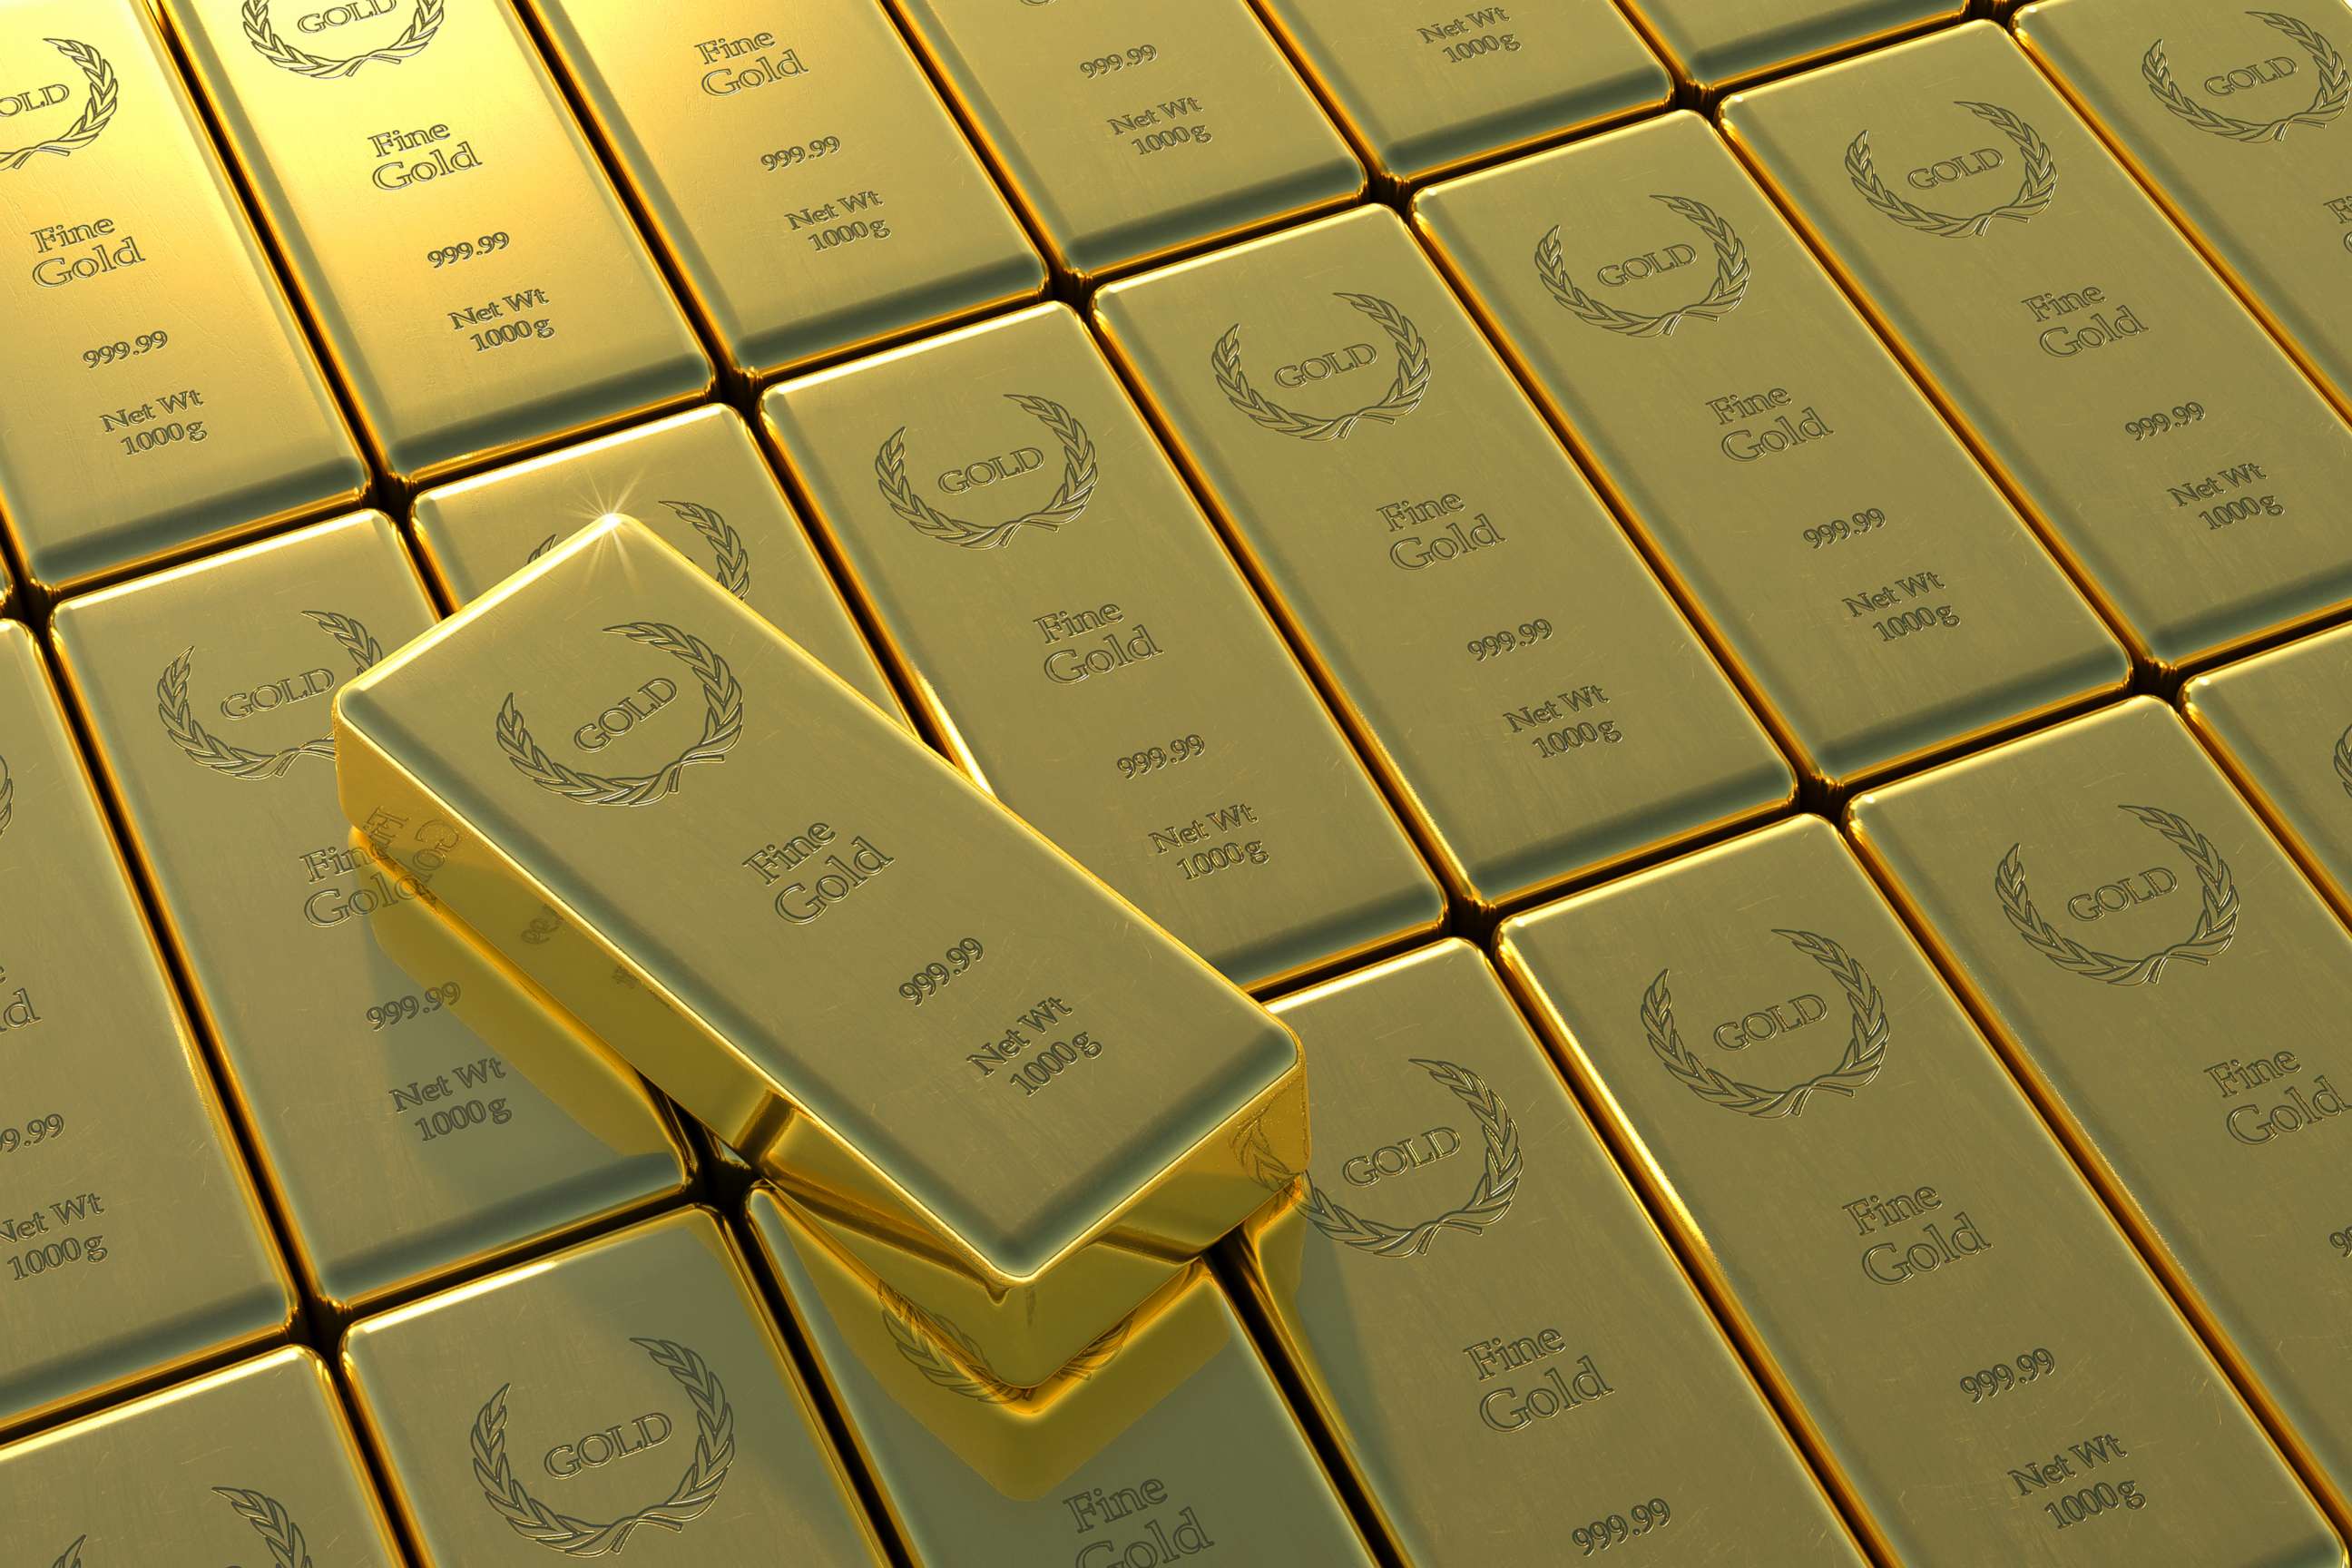 PHOTO: Gold bars are pictured in this undated stock photo.